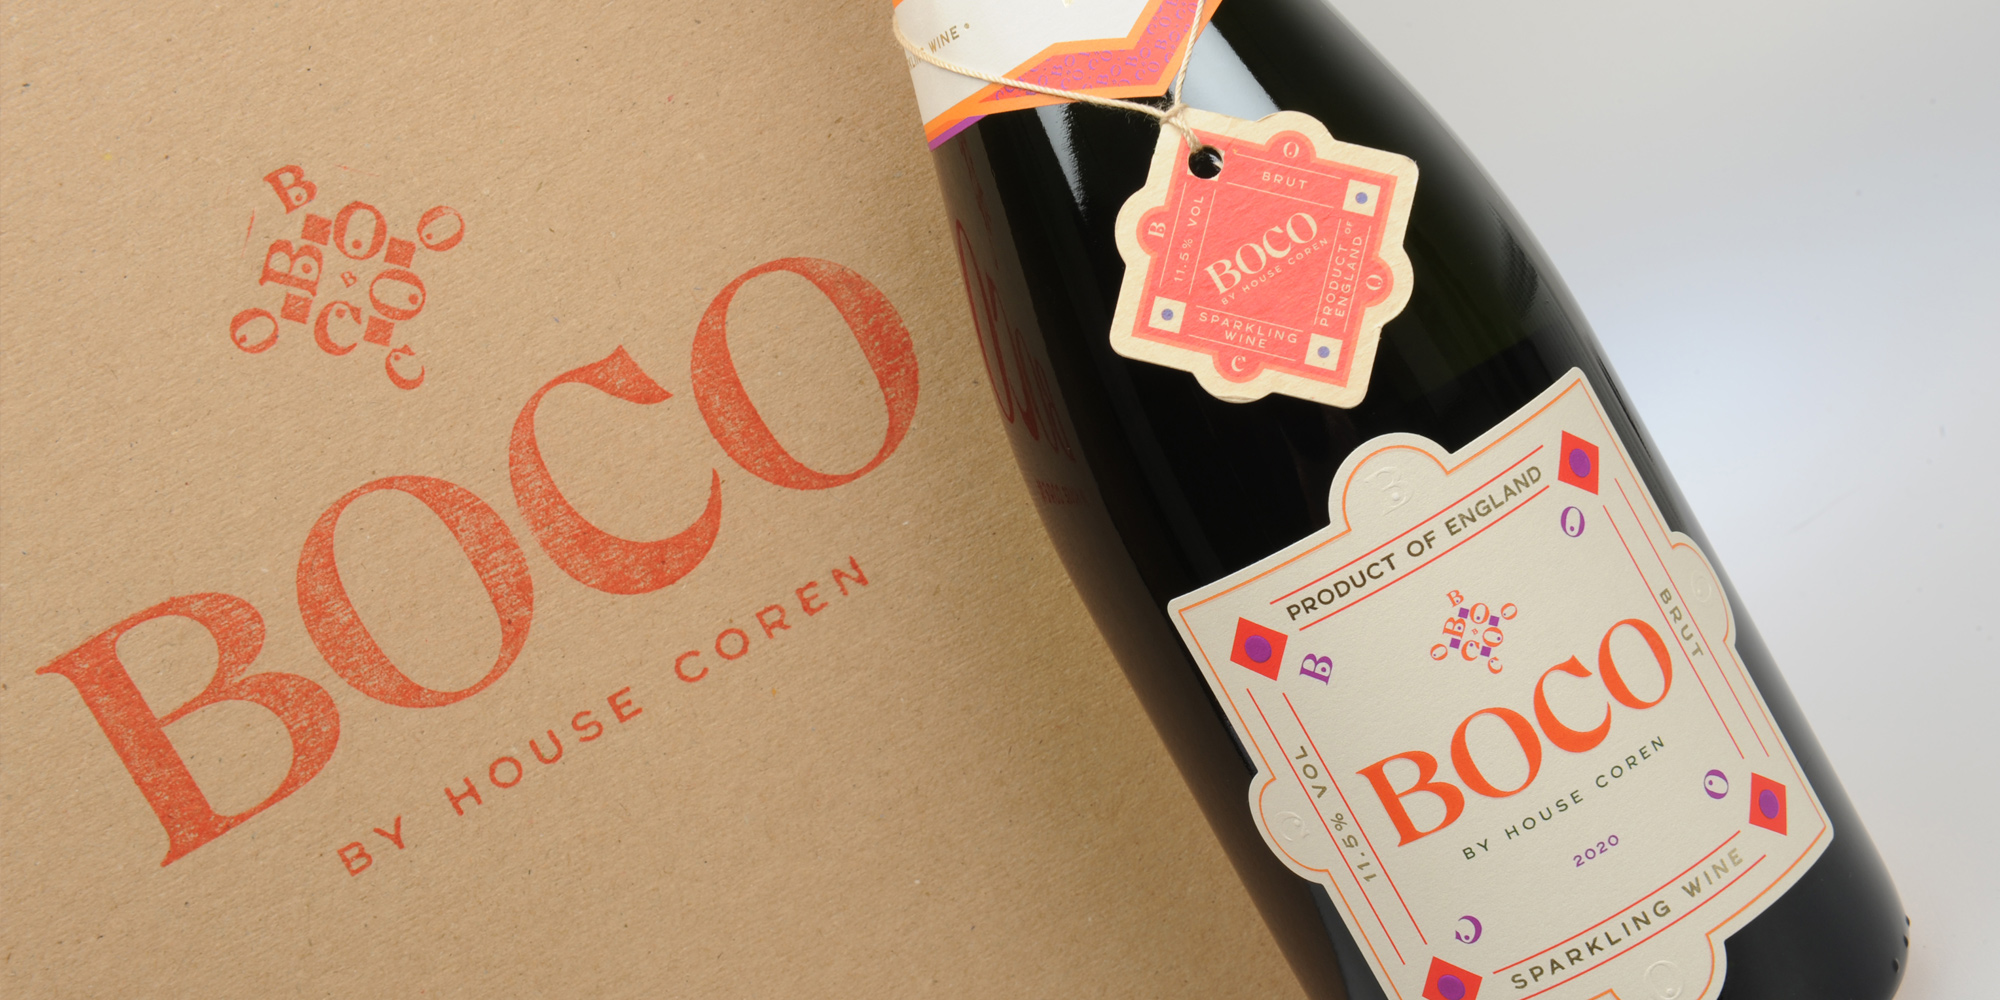 Boco sparkling wine for the bold by House Coren, West Sussex